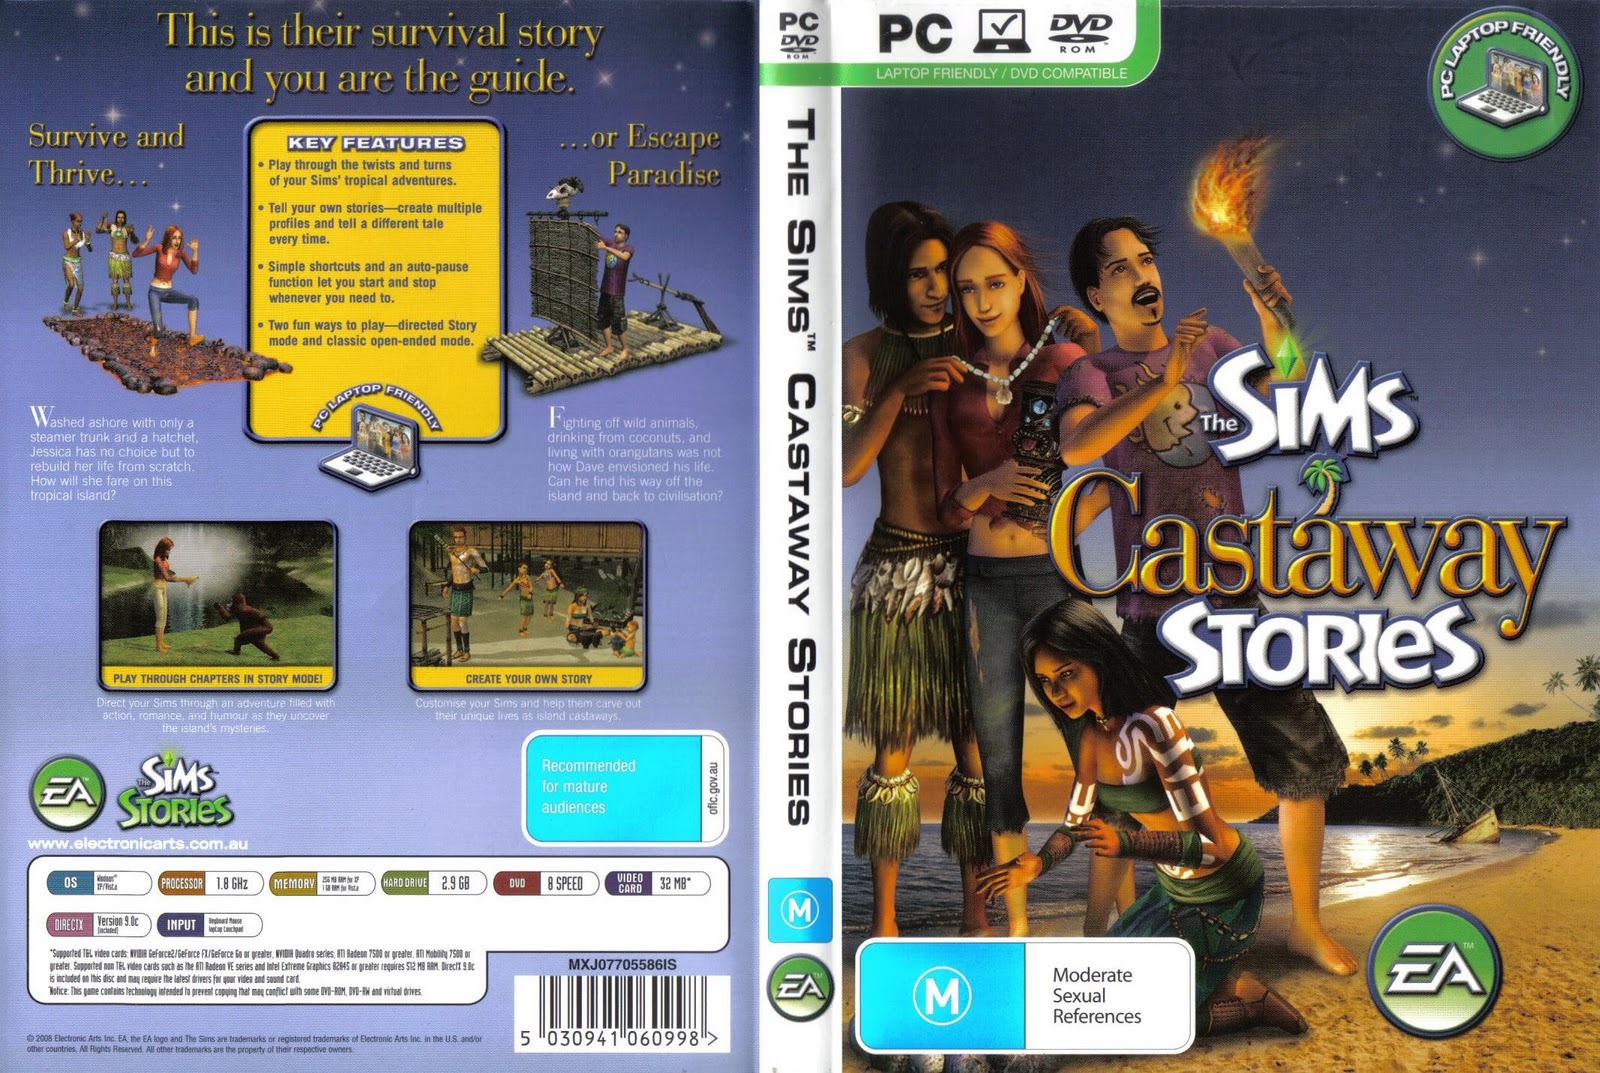 The Sims 2 Castaway Stories Pc Requirements